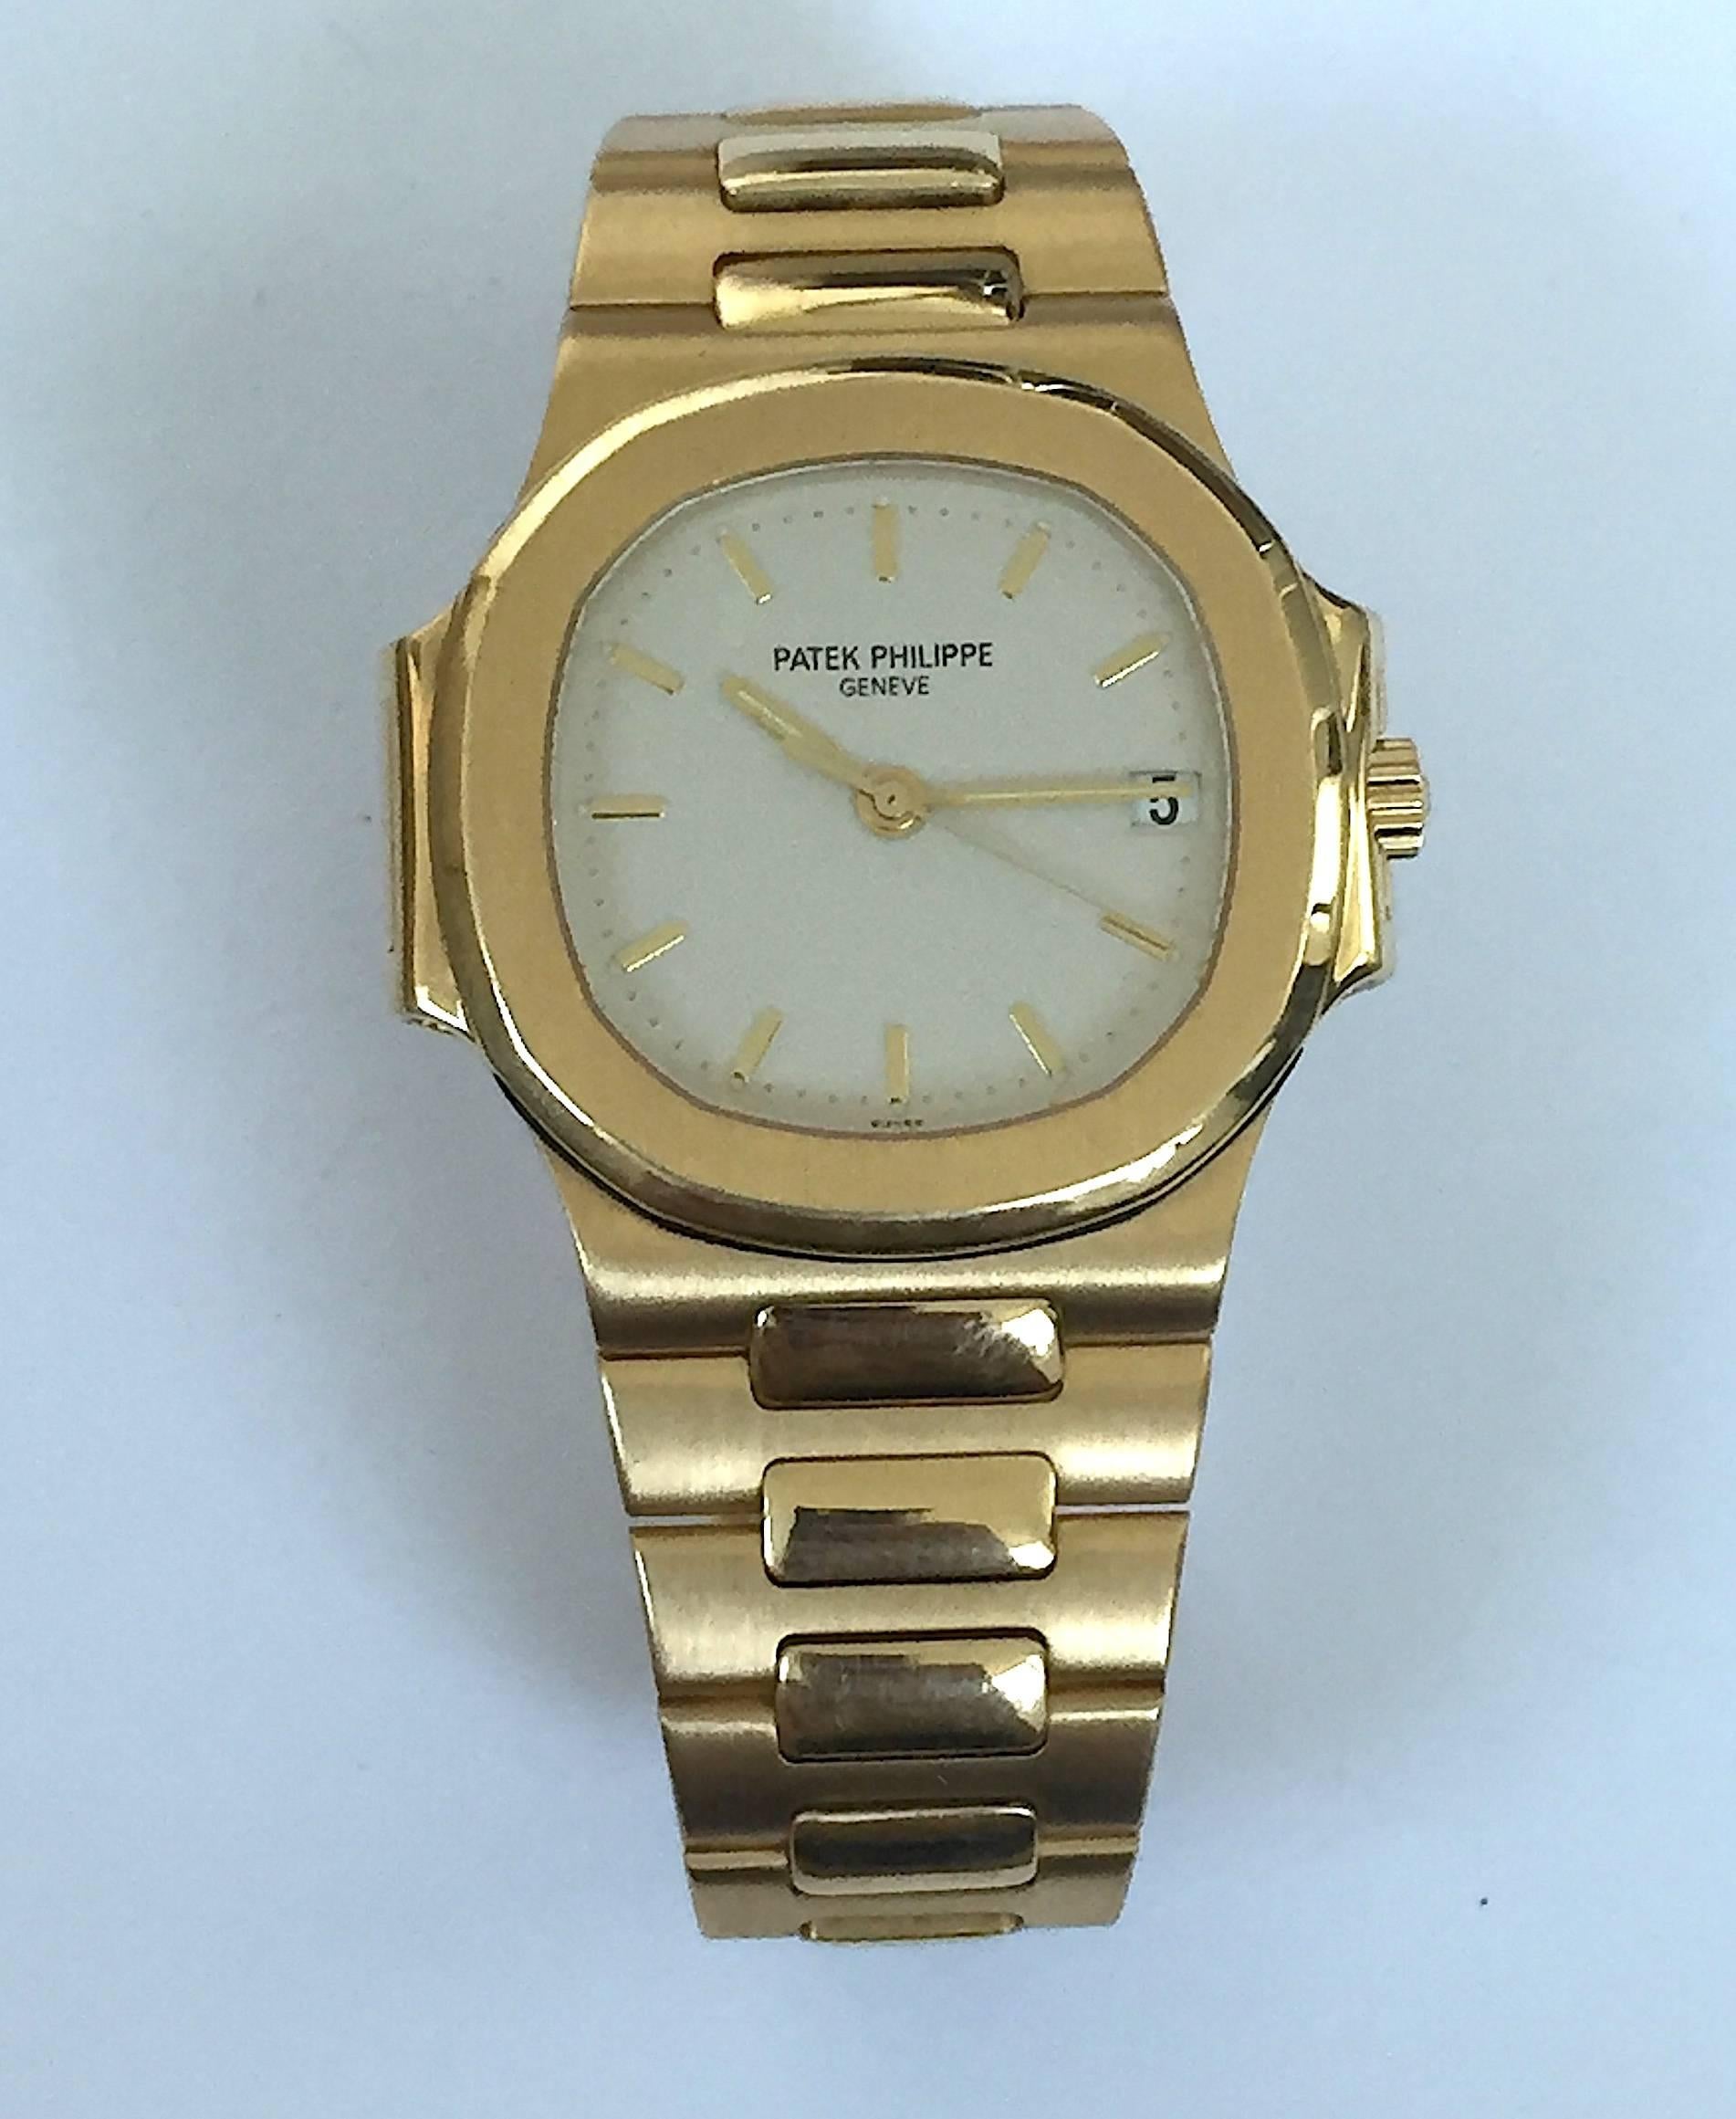 Patek Philippe 18K Yellow Gold Nautilus Watch
Factory Original Silver/Ivory Color Dial with Inlaid Beading Around the Perimeter and Swiss Marking
18K Yellow Case
Reference 3800
38mm Size
Patek Philippe Automatic Wind Movement 
Sapphire Crystal
Circa